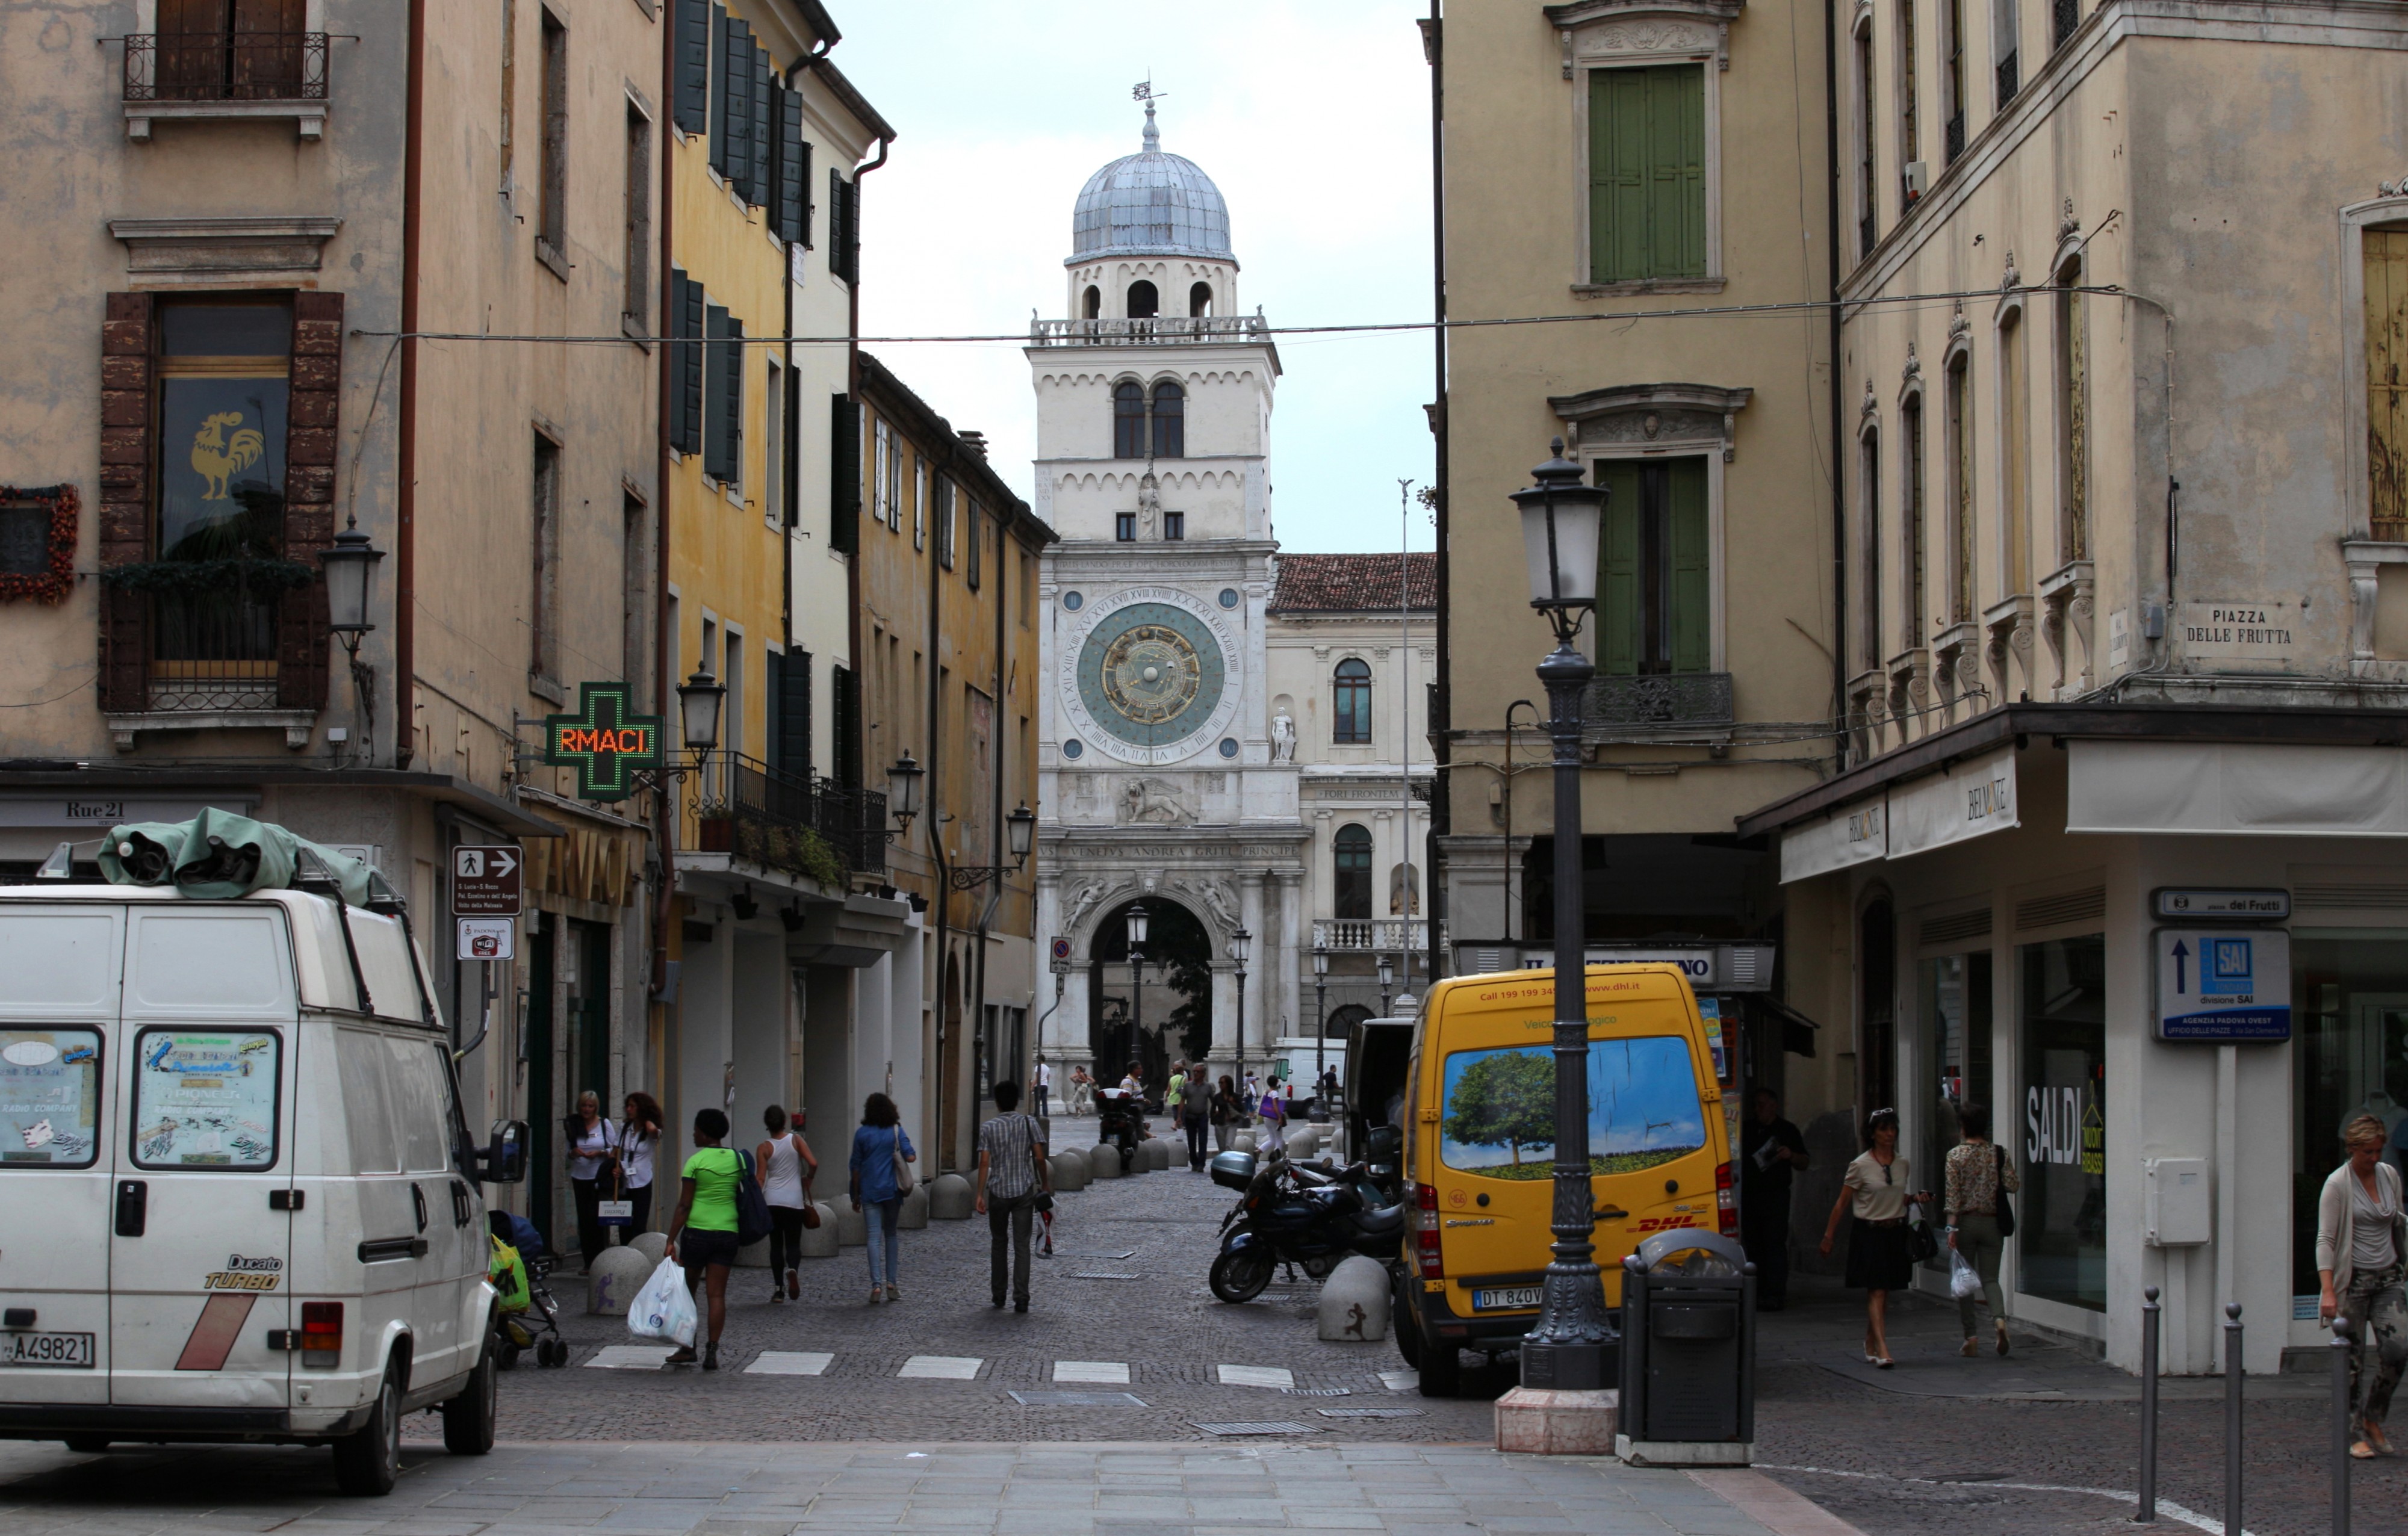 Padua city, Italy, Europe, August 2013, picture 13